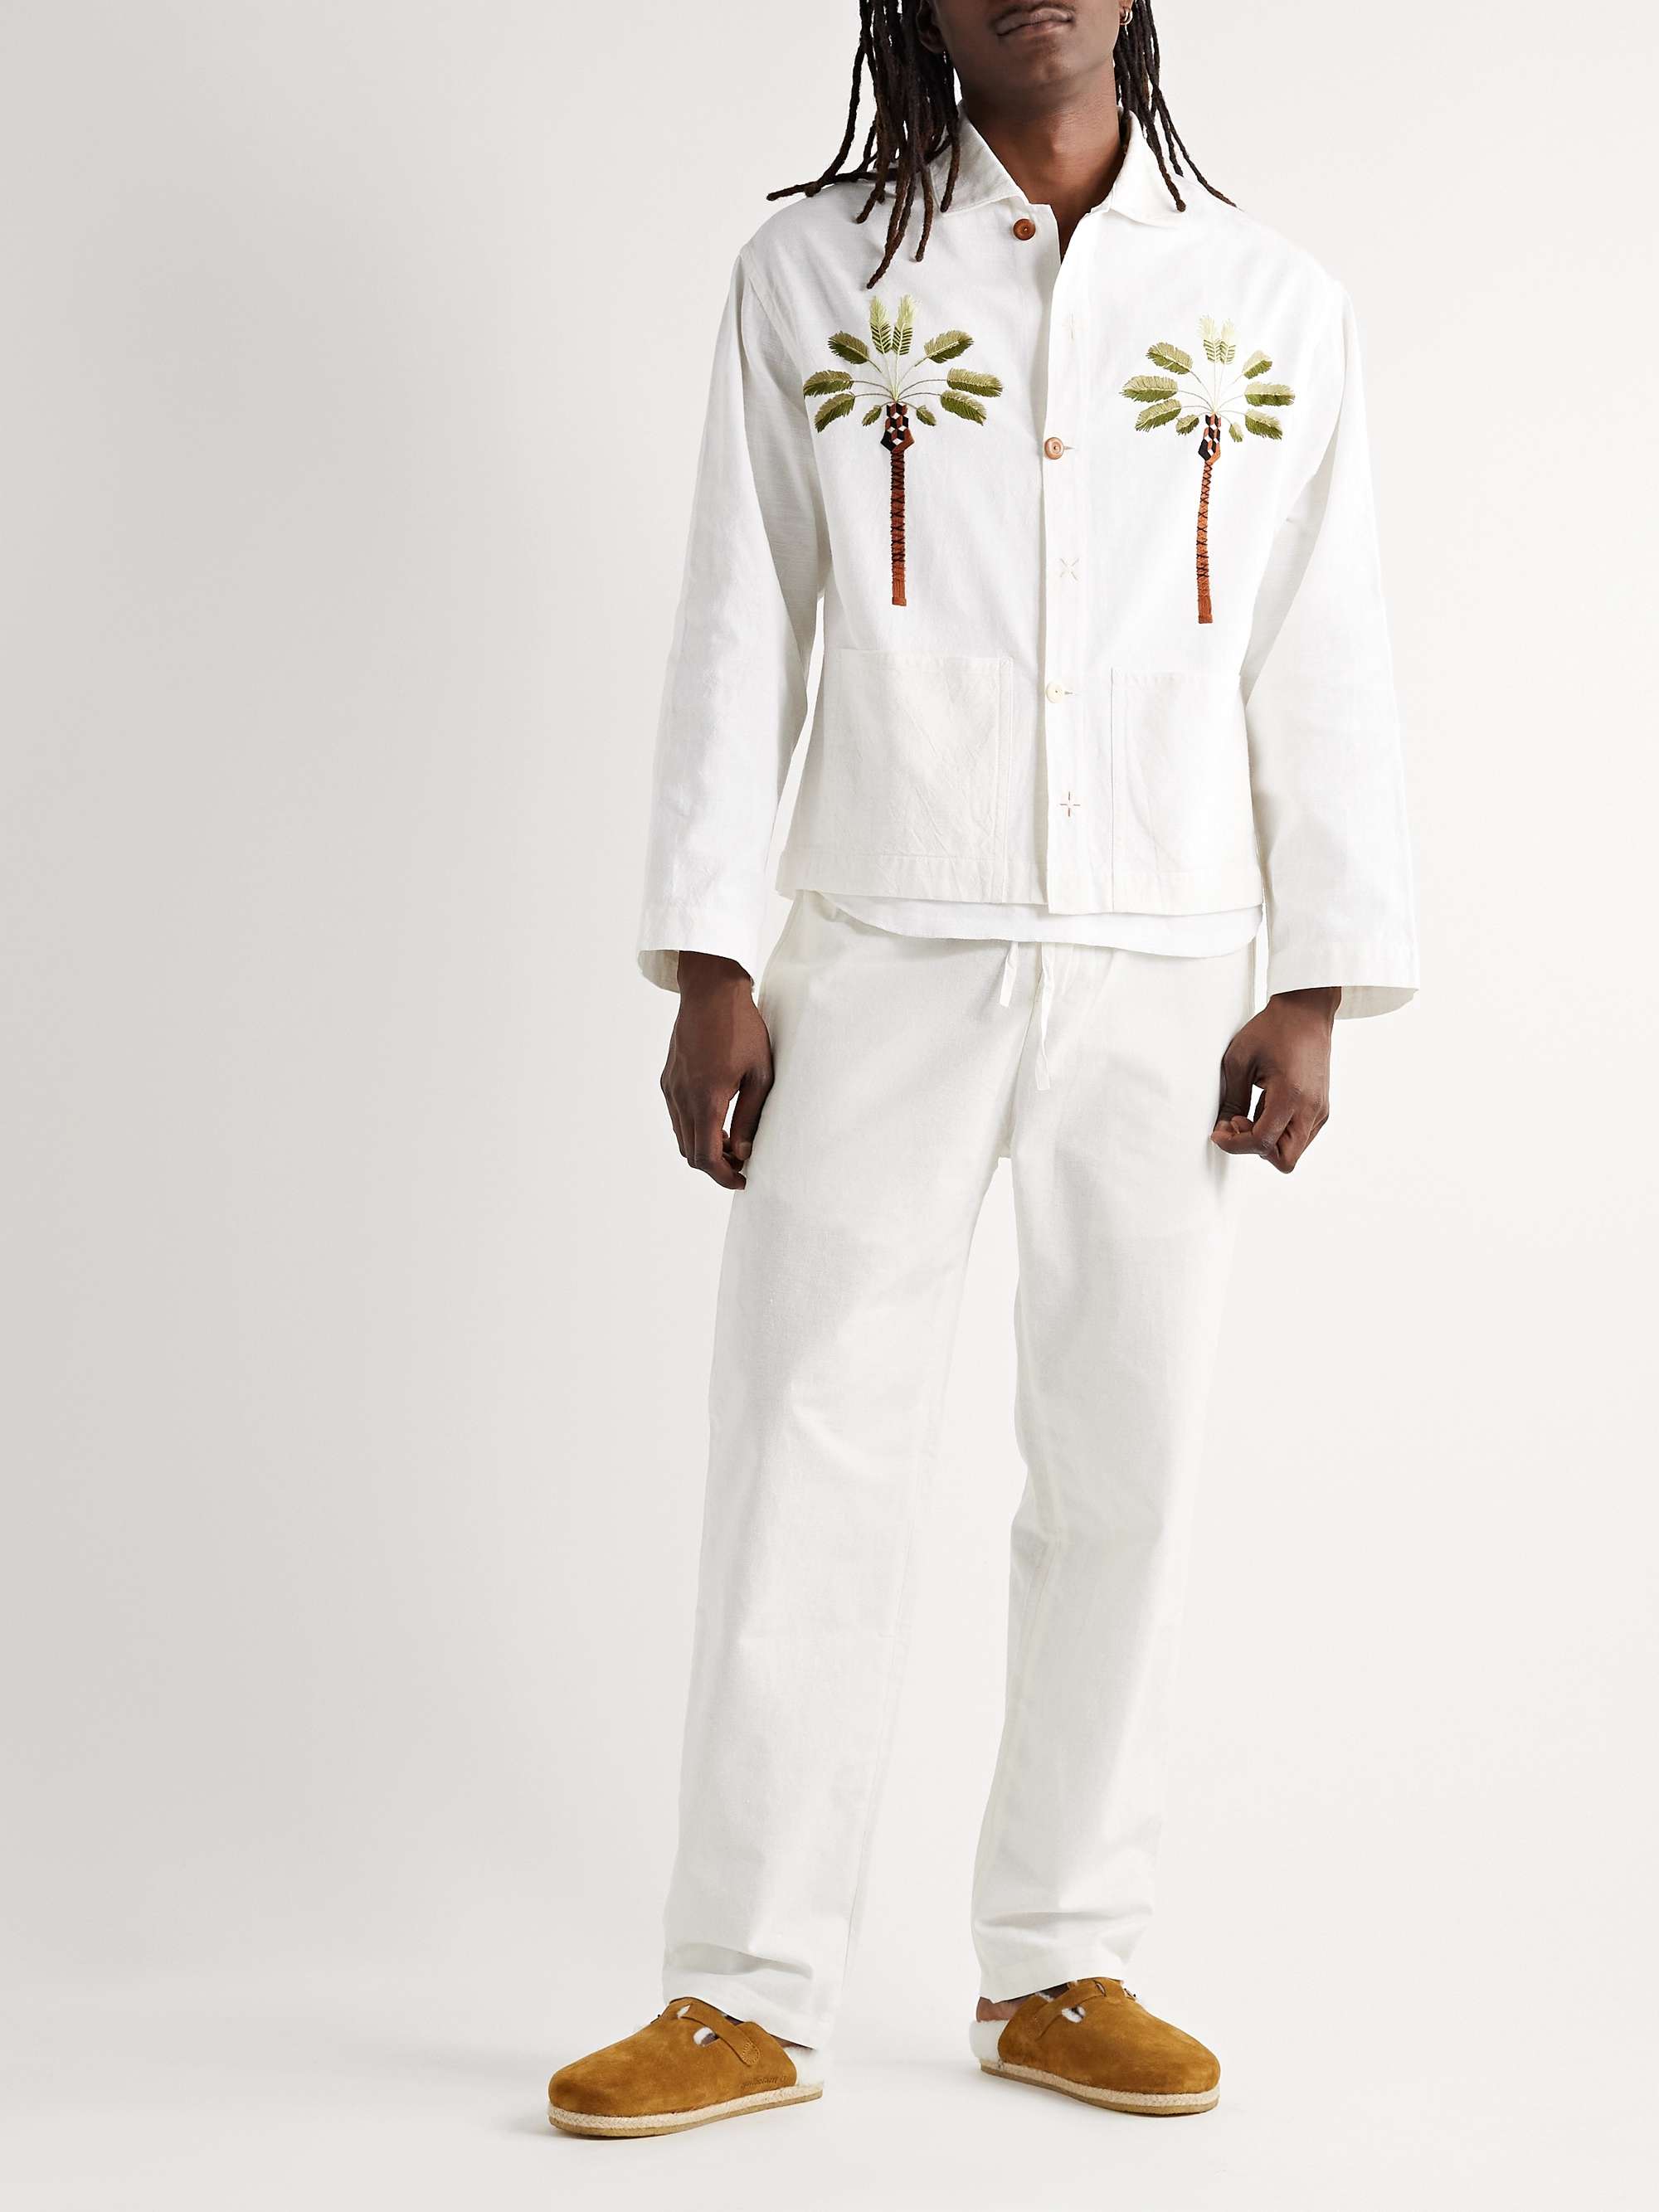 STORY MFG. Short on Time Embroidered Organic Cotton Chore Jacket